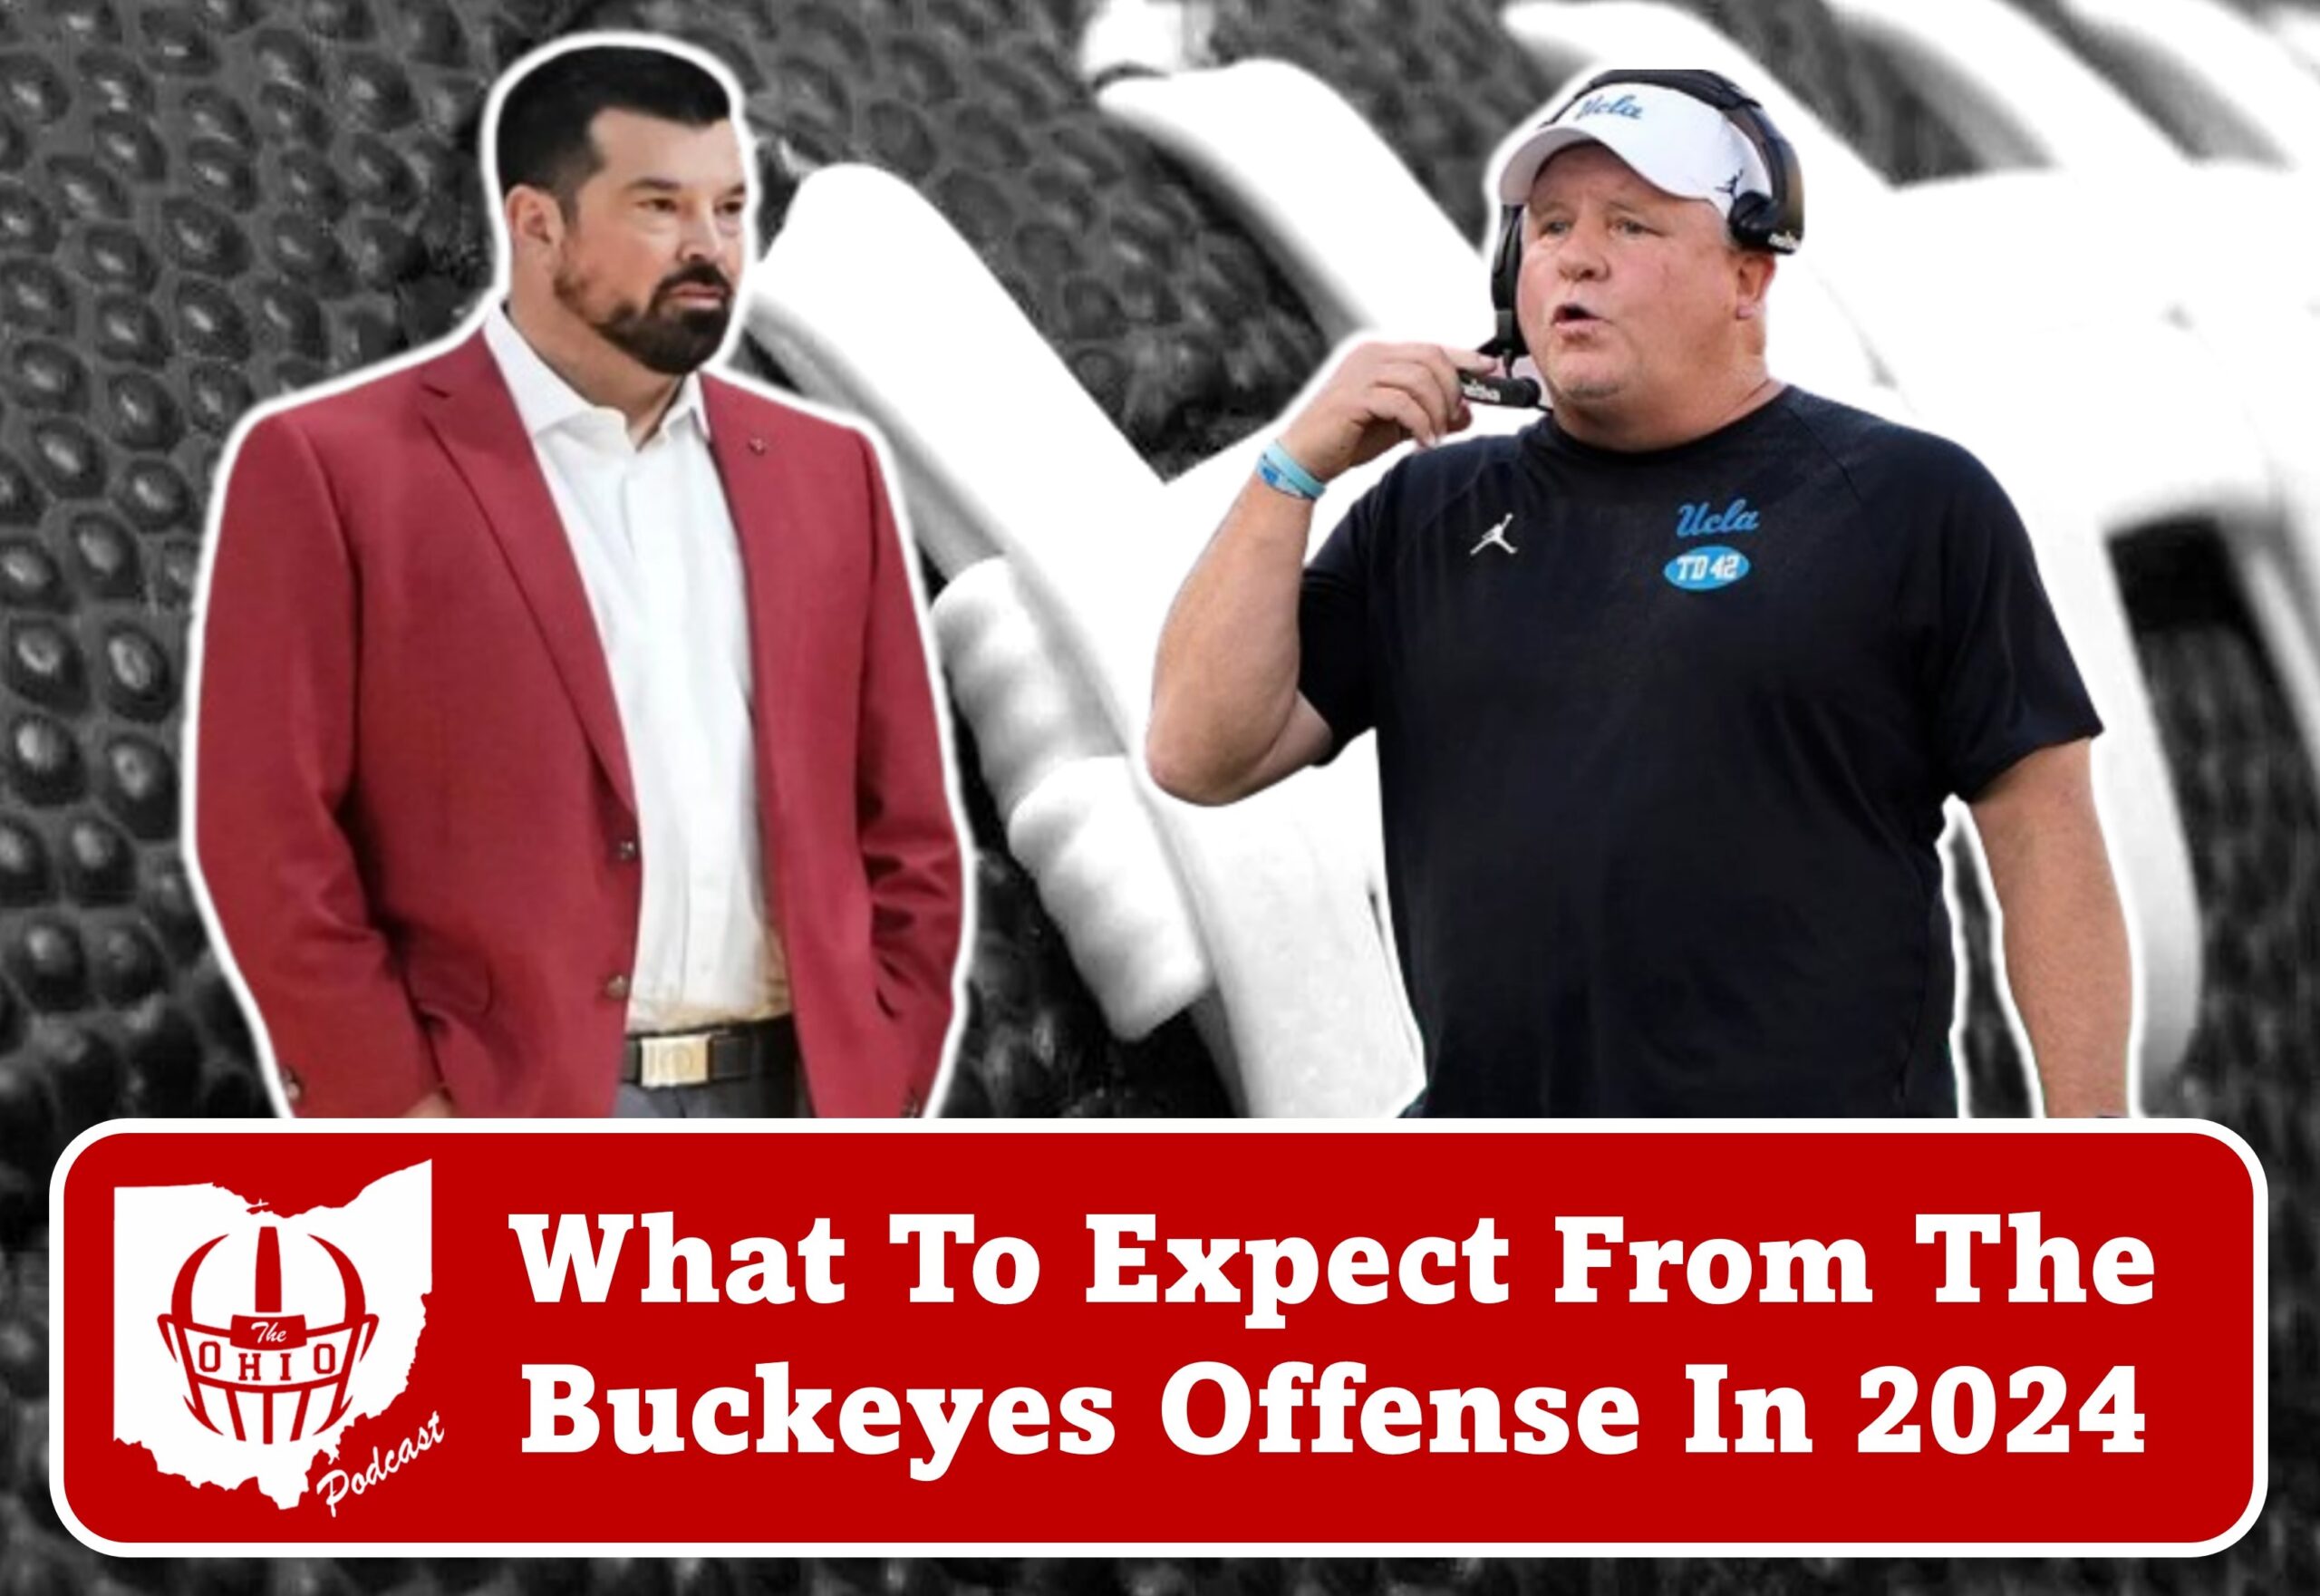 What To Expect From The Buckeyes Offense In 2024